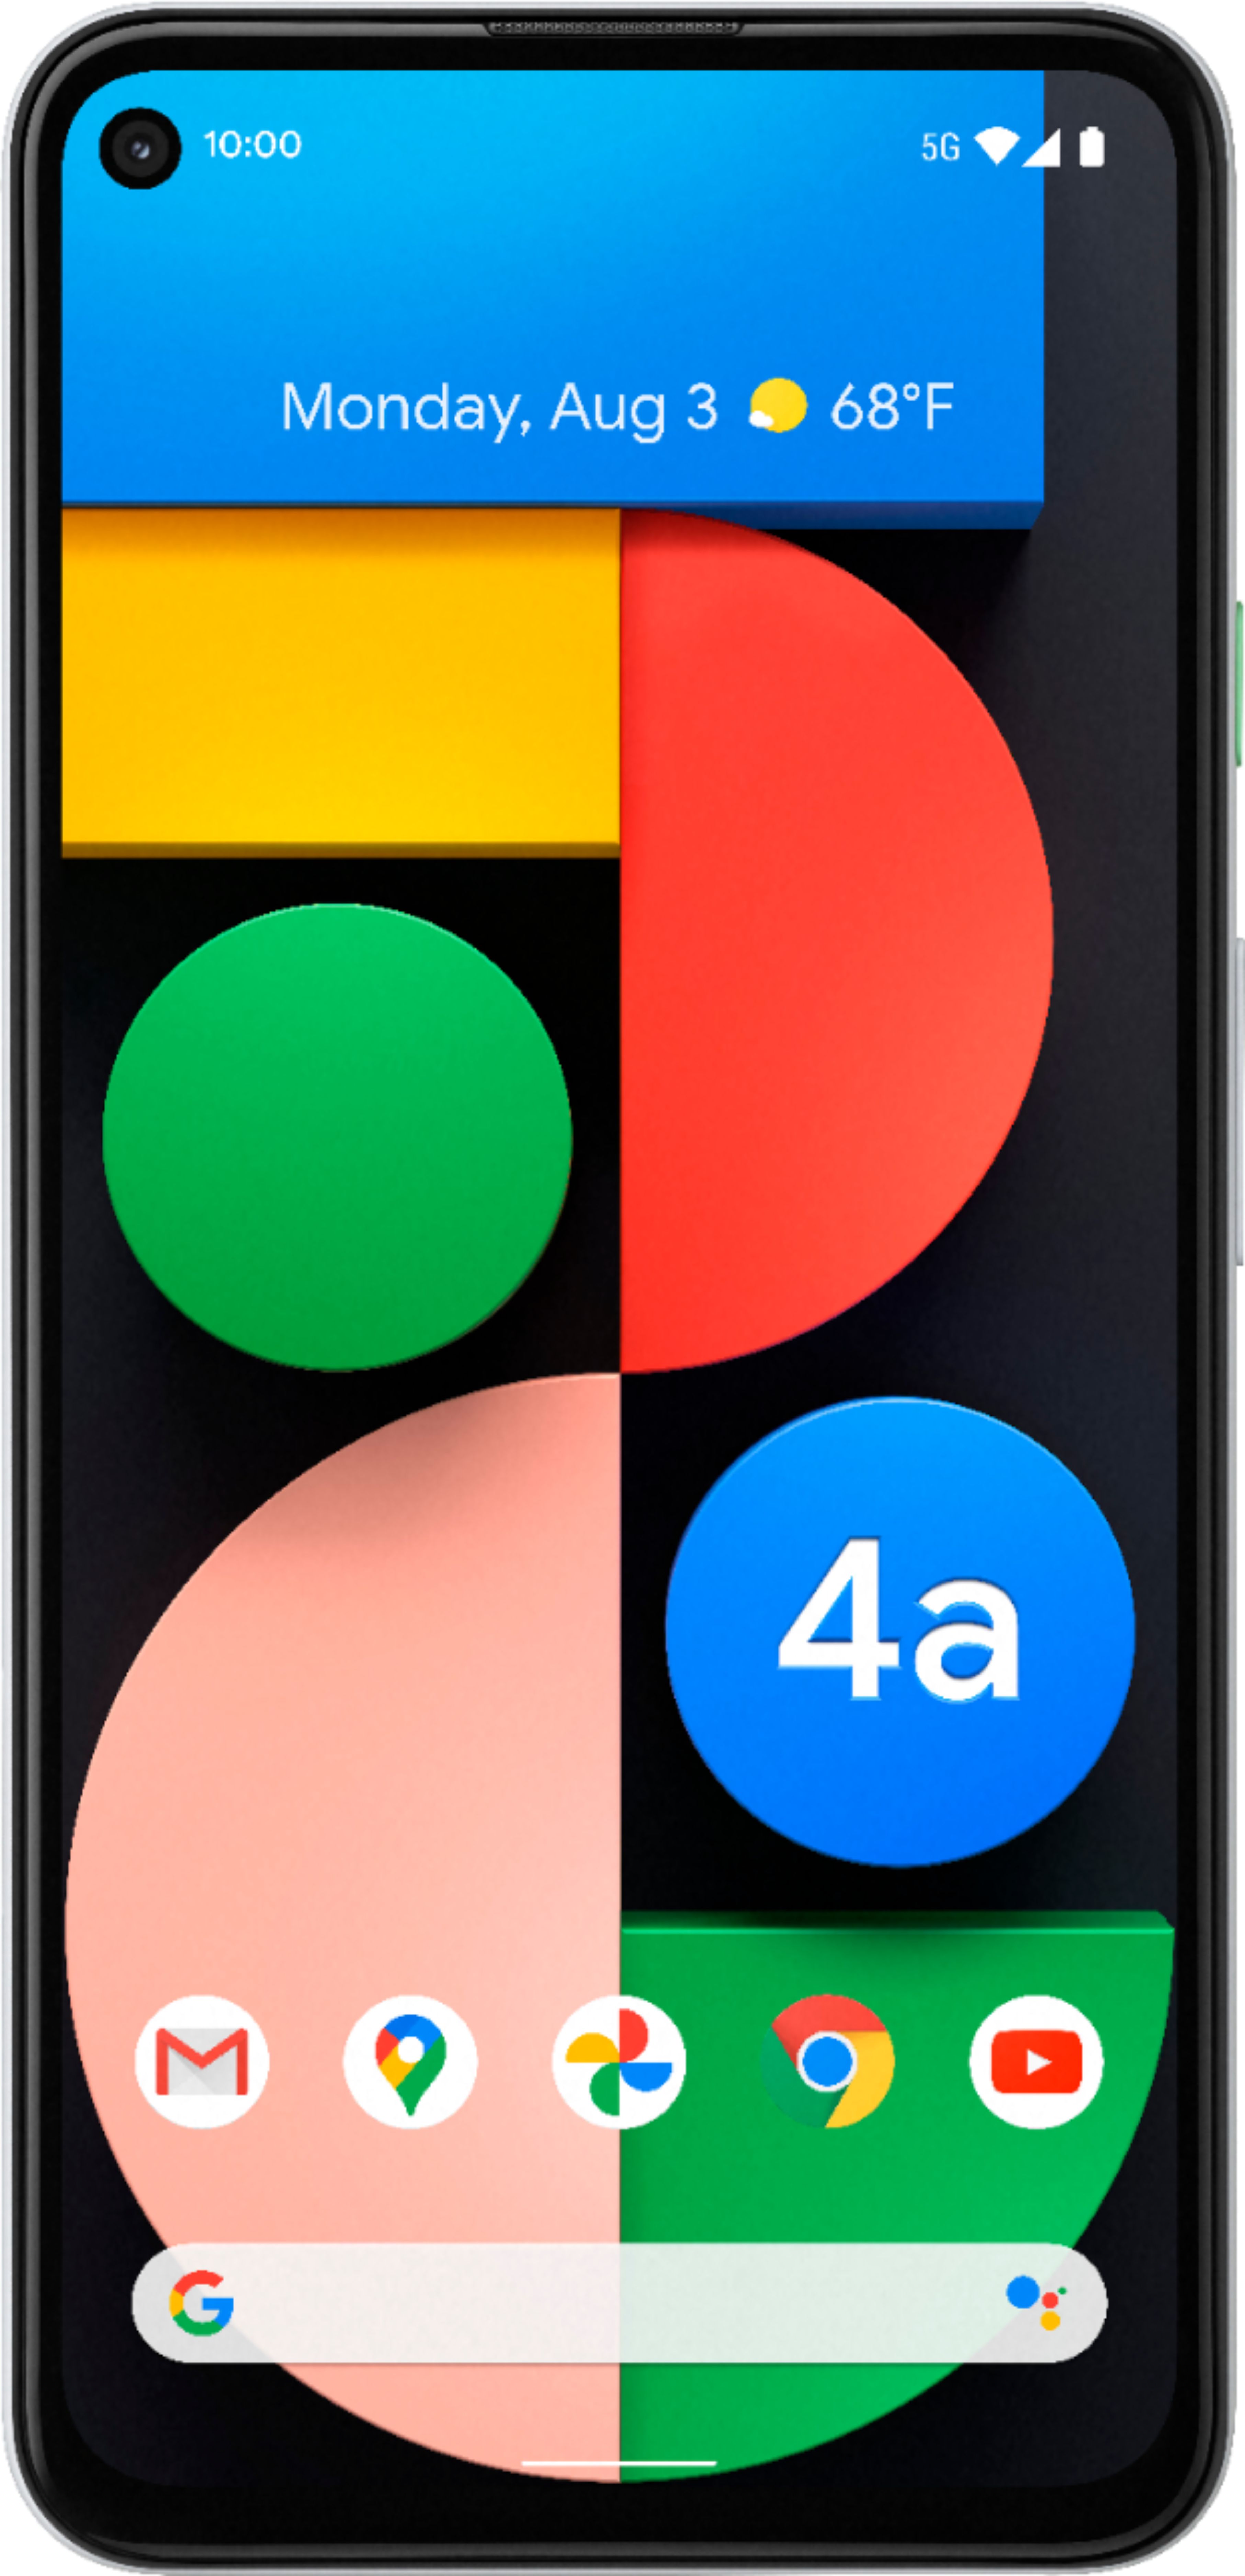 Angle View: Google Pixel 4a with 5G - 5G smartphone - RAM 6 GB / Internal Memory 128 GB - OLED display - 6.2" - 2340 x 1080 pixels - 2x rear cameras 12.2 MP, 16 MP - front camera 8 MP - clearly white